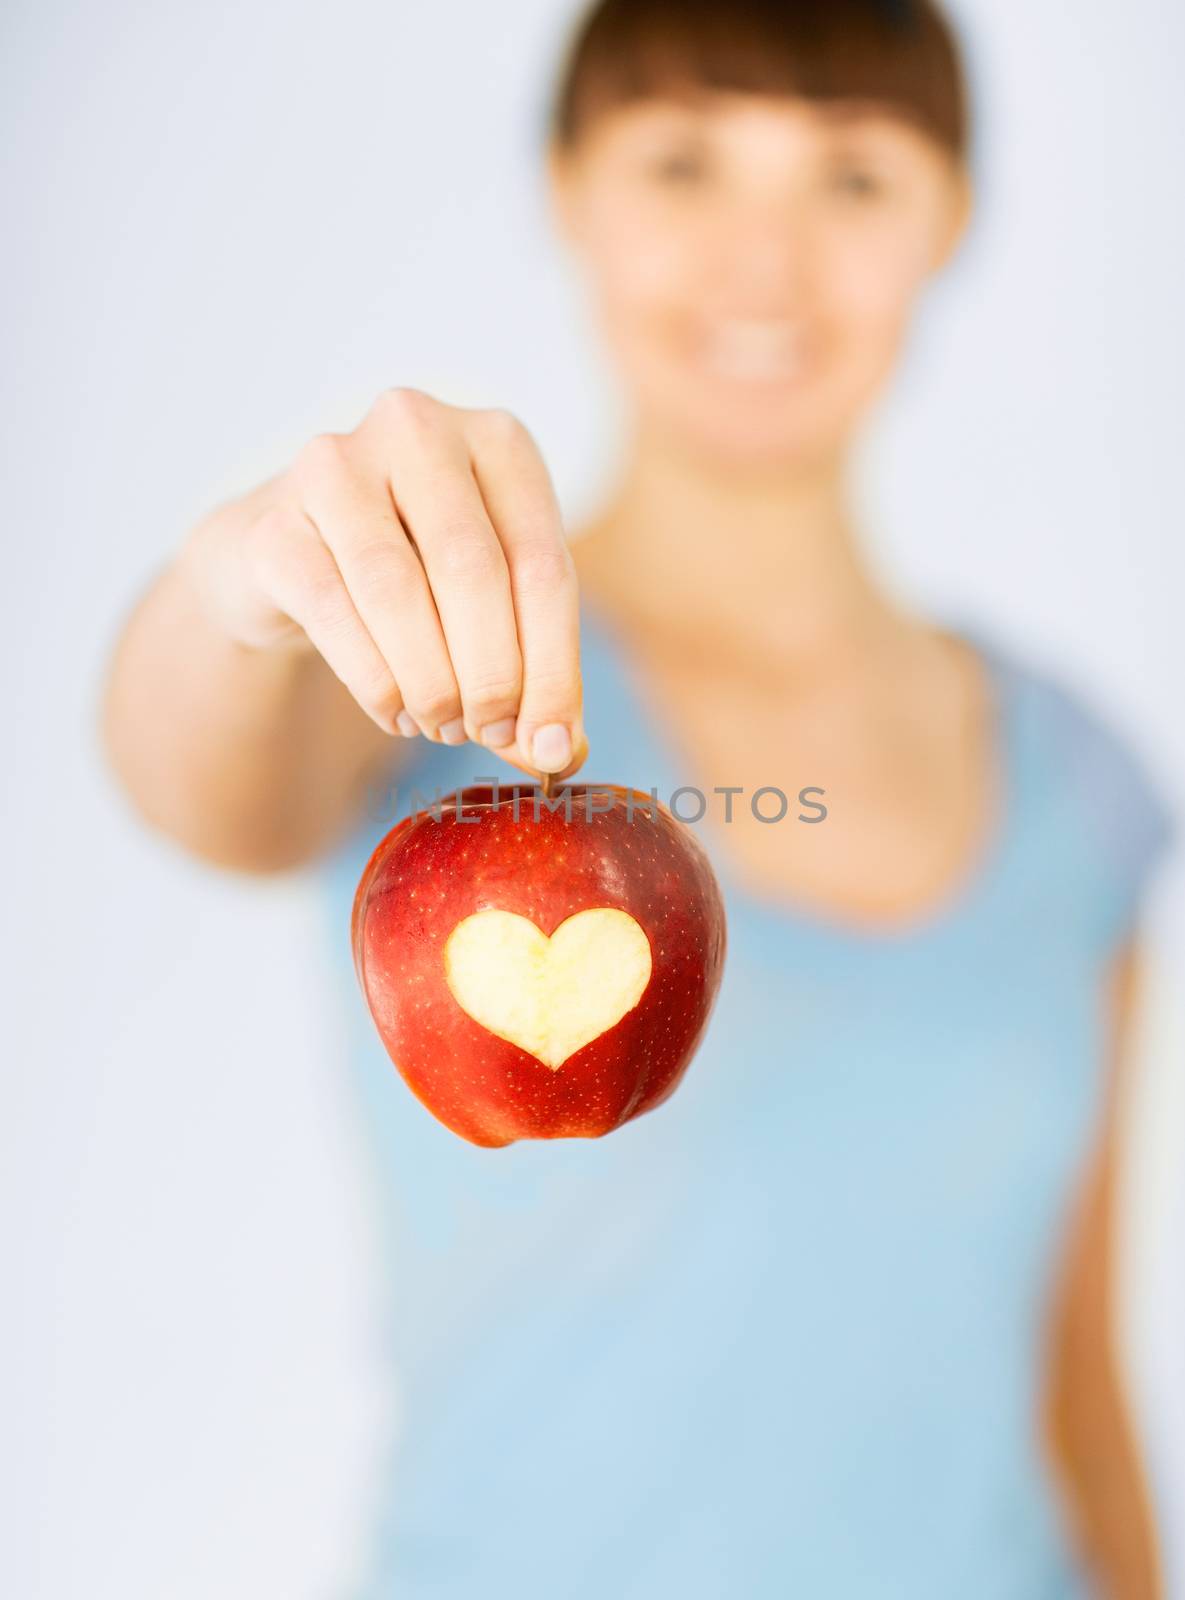 healthy food and lifestyle - woman hand holding red apple with heart shape